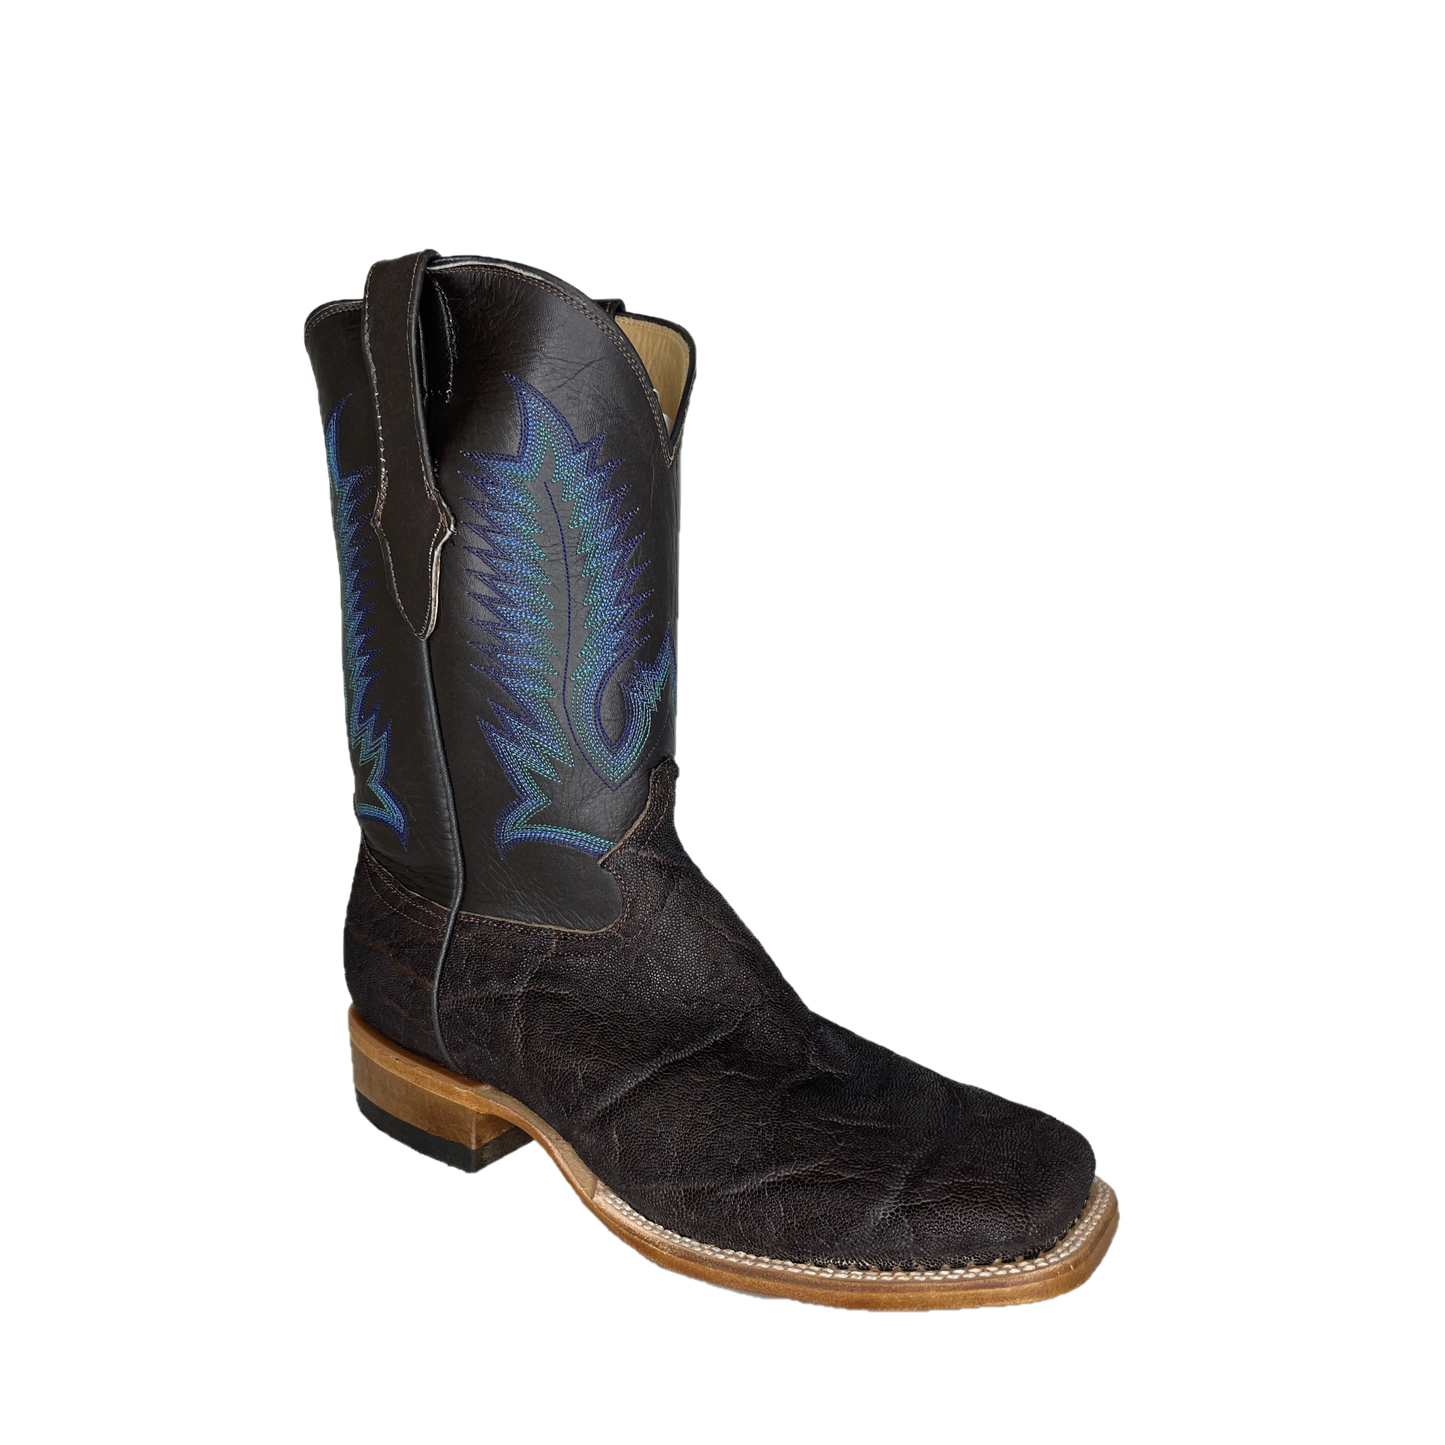 Cowtown Men's Black Elephant Leather Square Toe Western Boots Q837